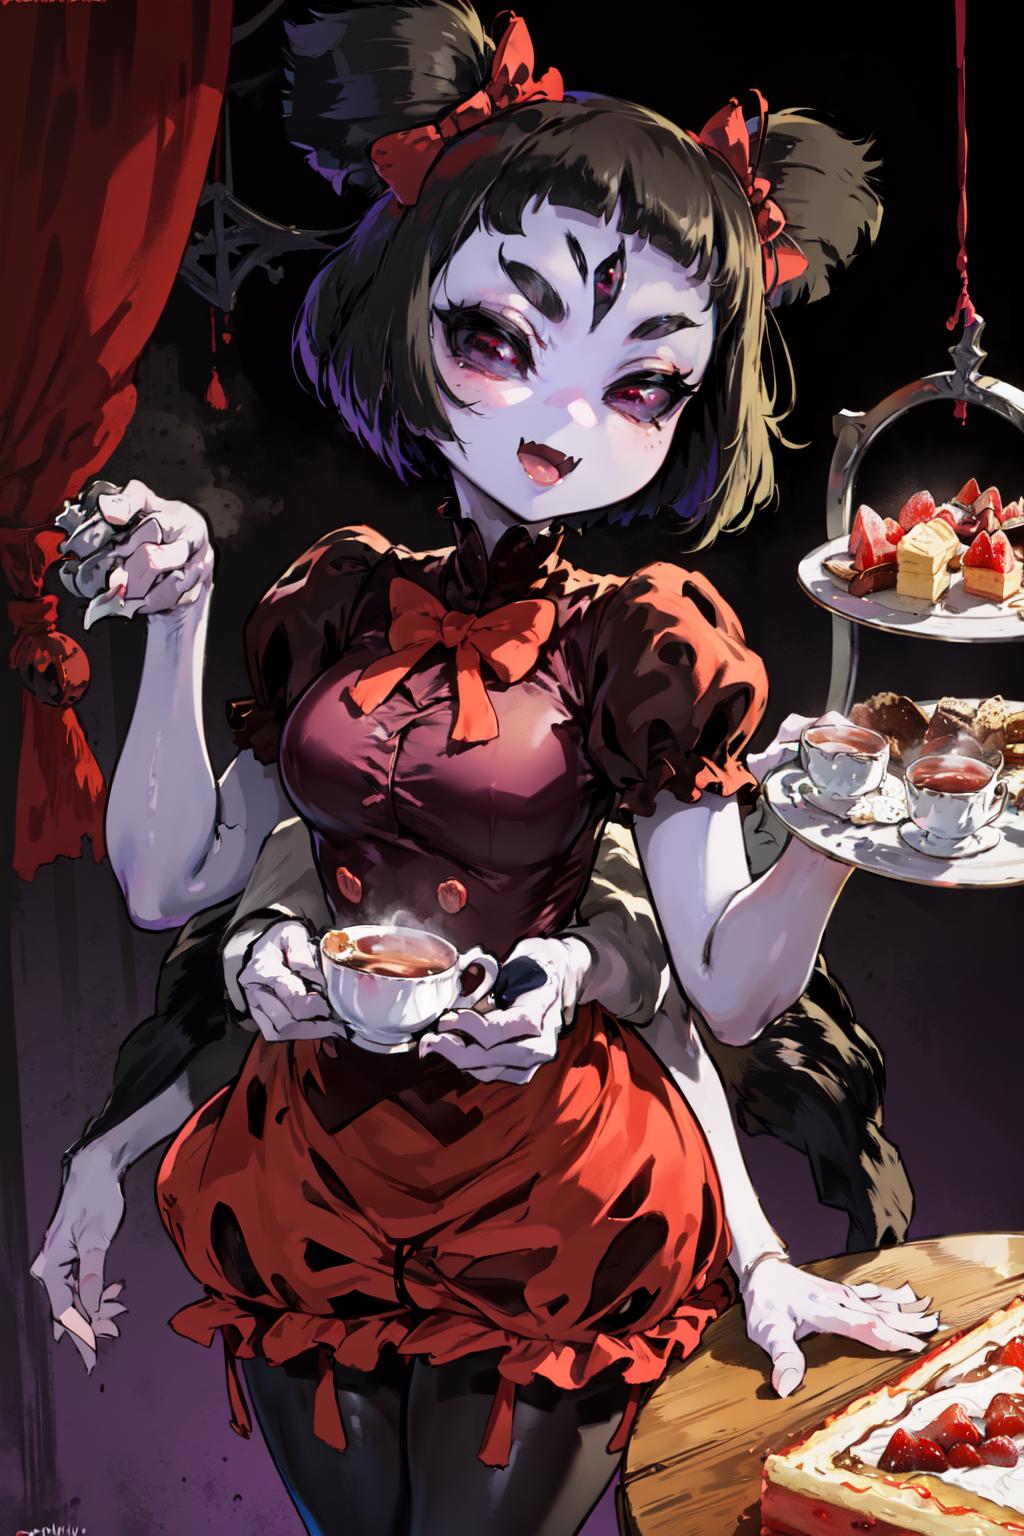 Muffet [Undertale] image by P317cm